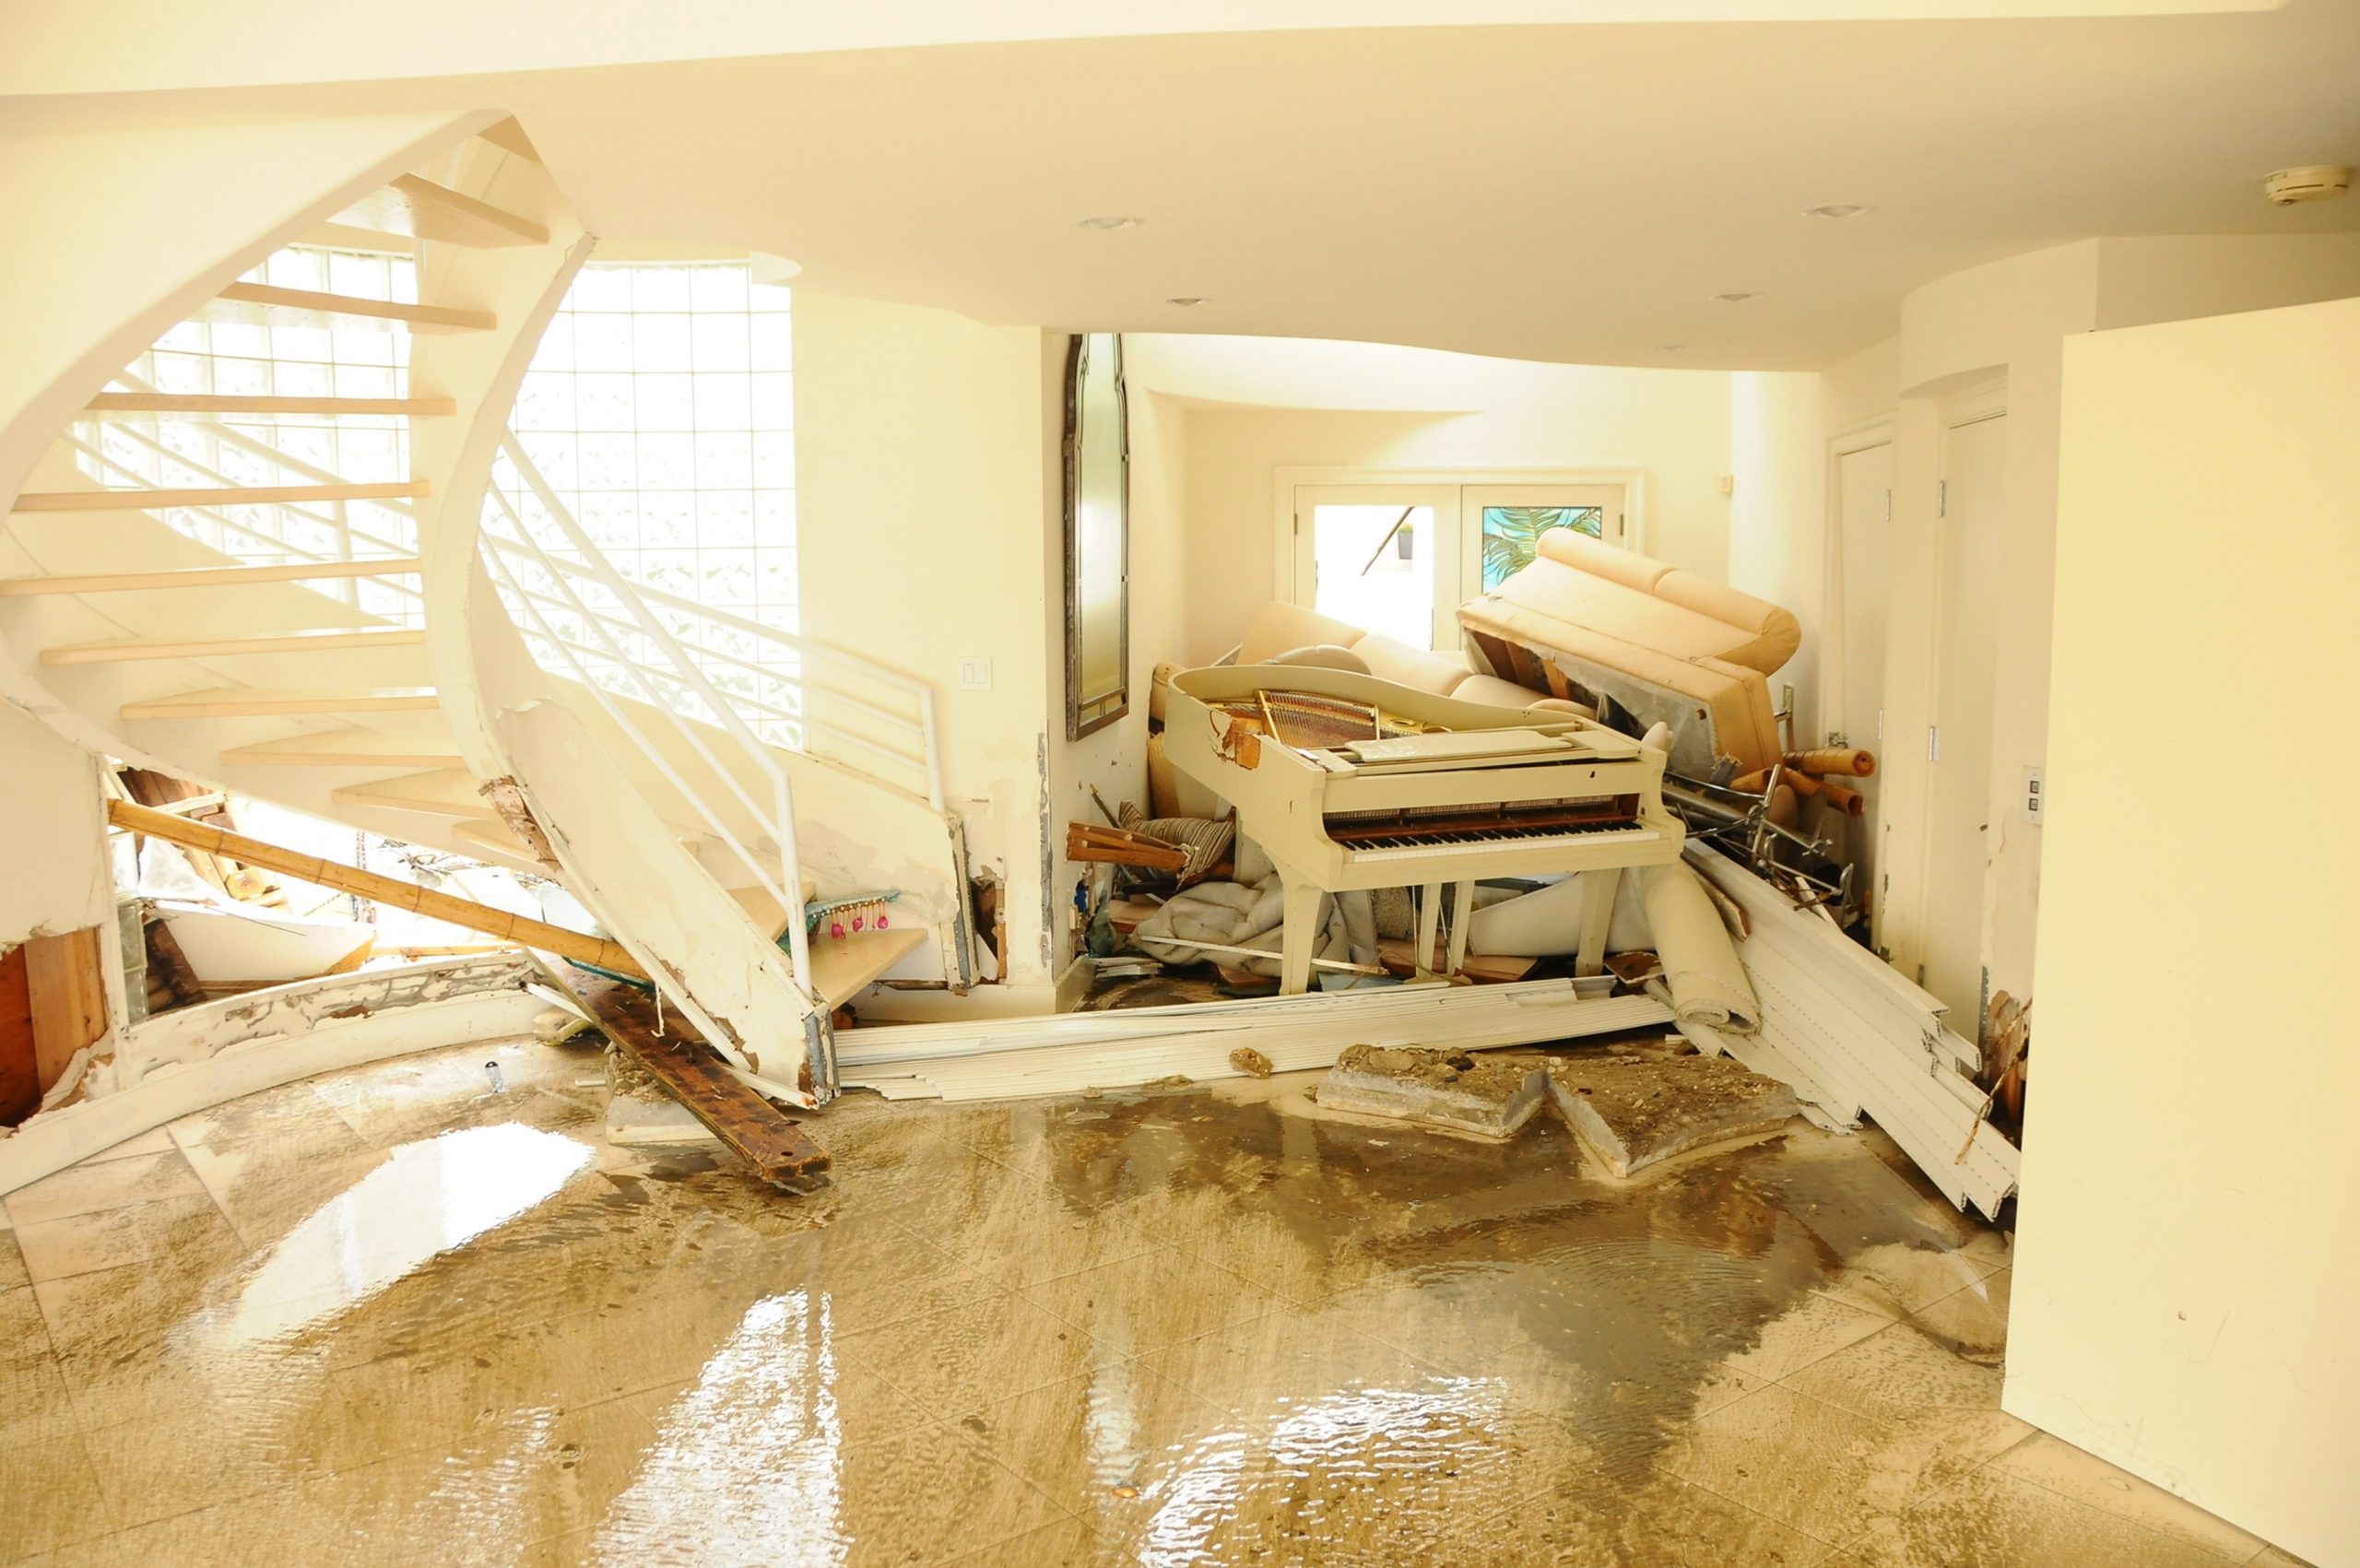 Phases of professional Orlando water damage restoration for flooded buildings